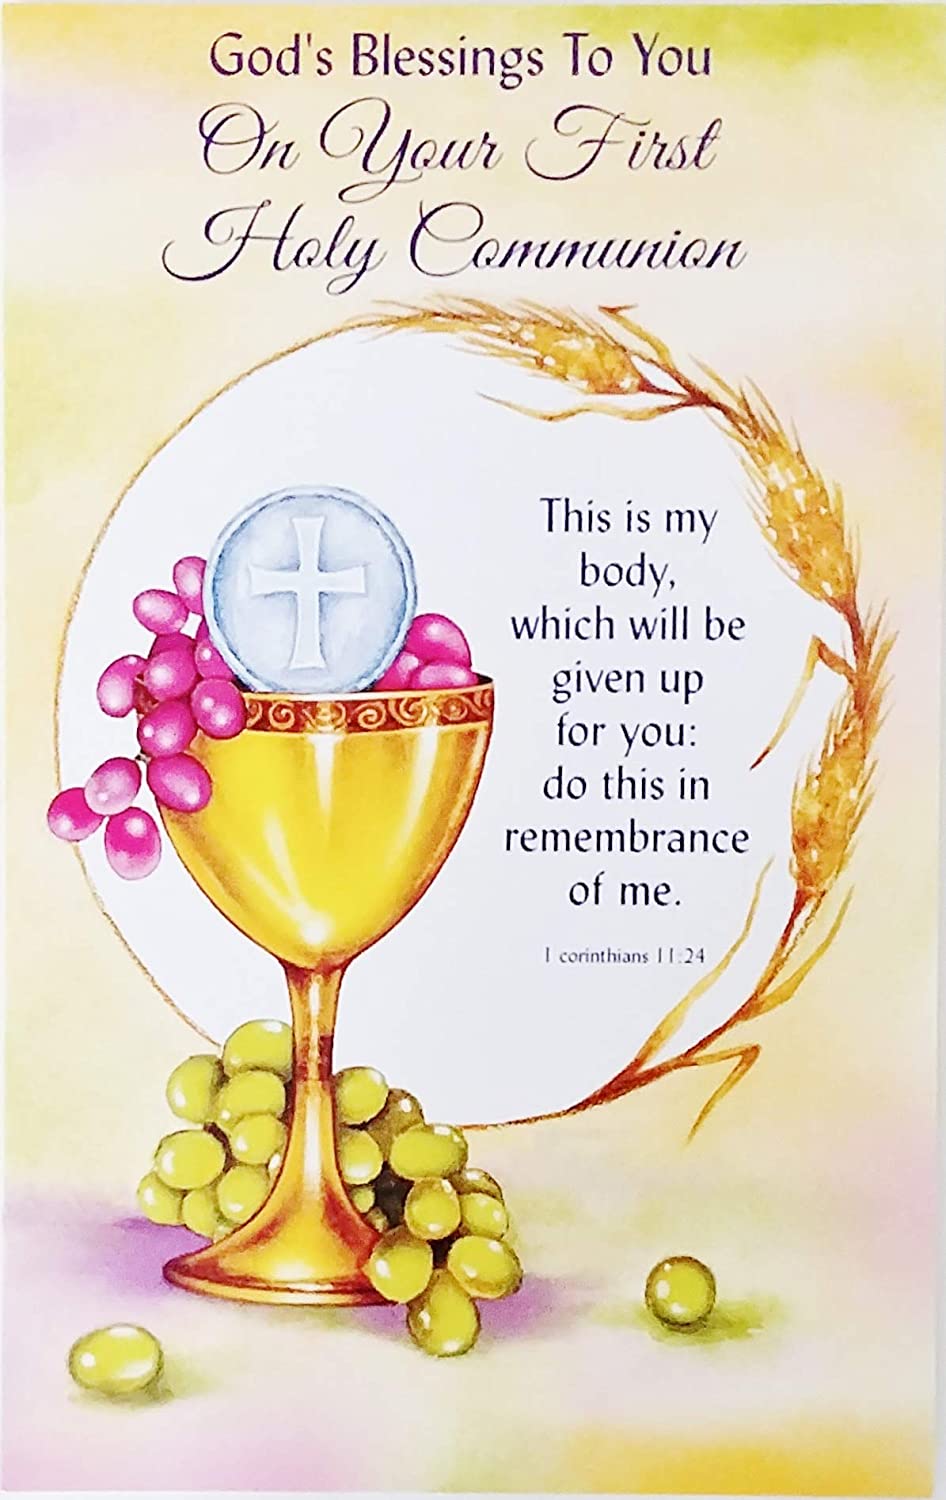 Amazon.com, God's Blessings To You On Your First Holy Communion Greeting Card You Receive Jesus, May He Bless You Today and Always, Office Products